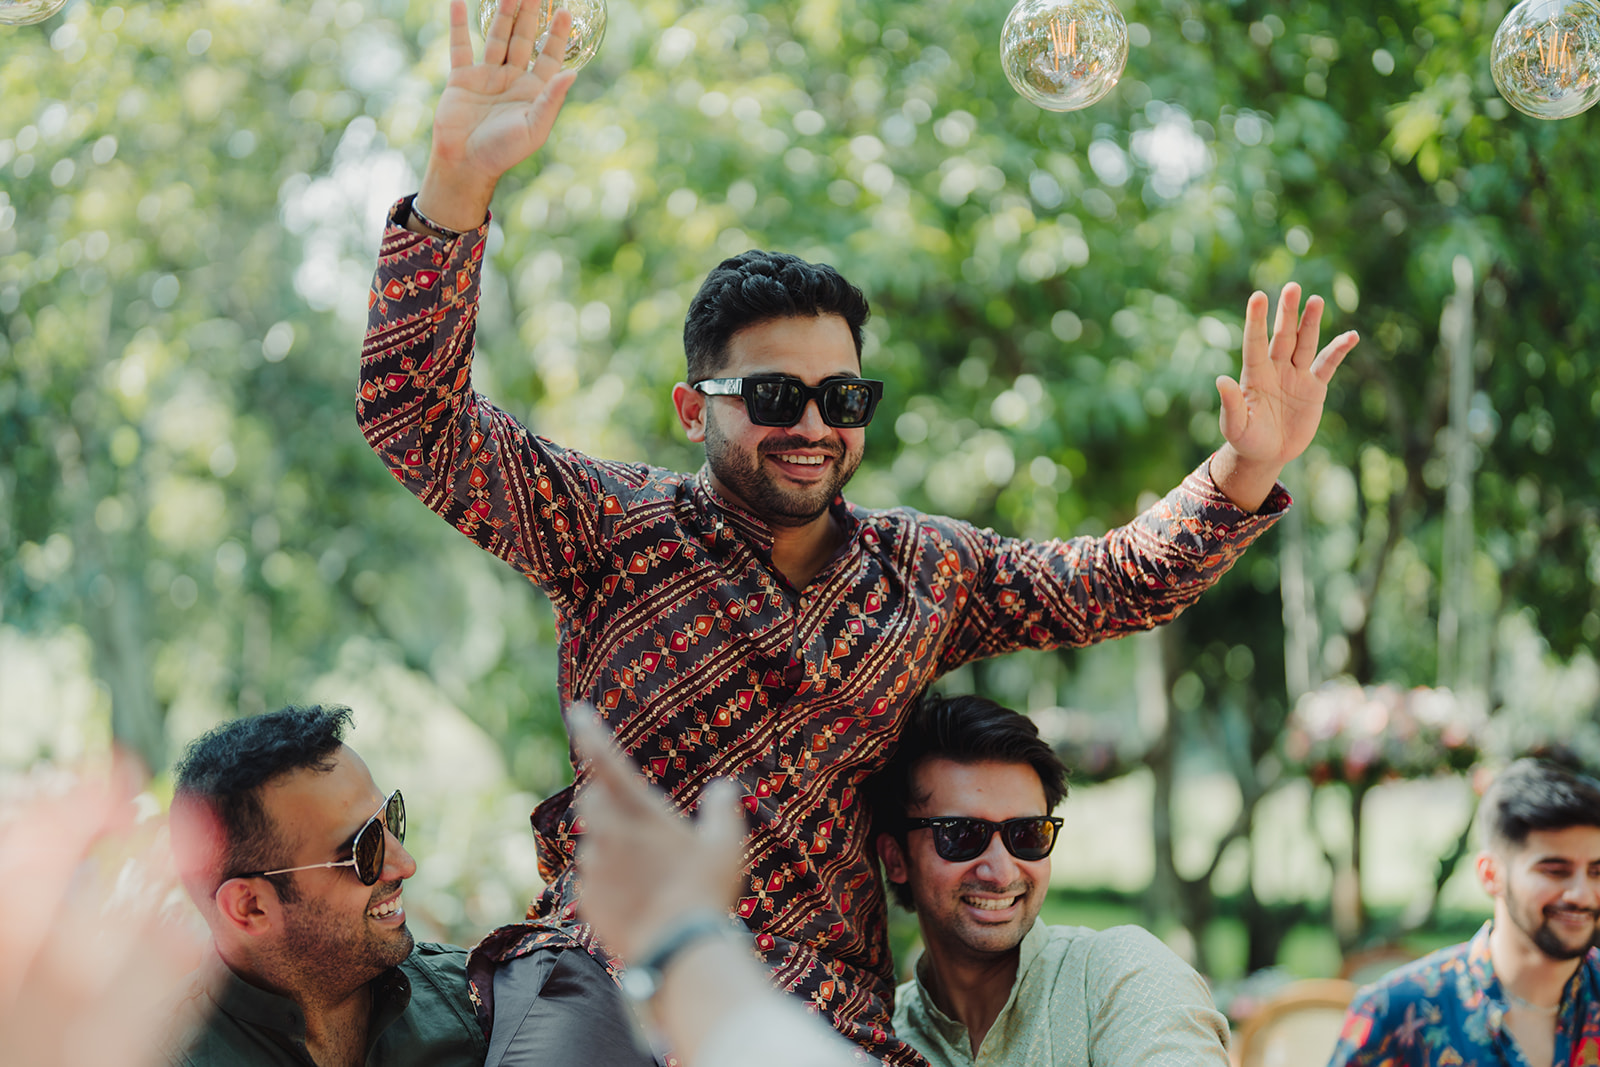 Cultural revelry: Groom showcasing his dance moves to the lively dhol rhythm